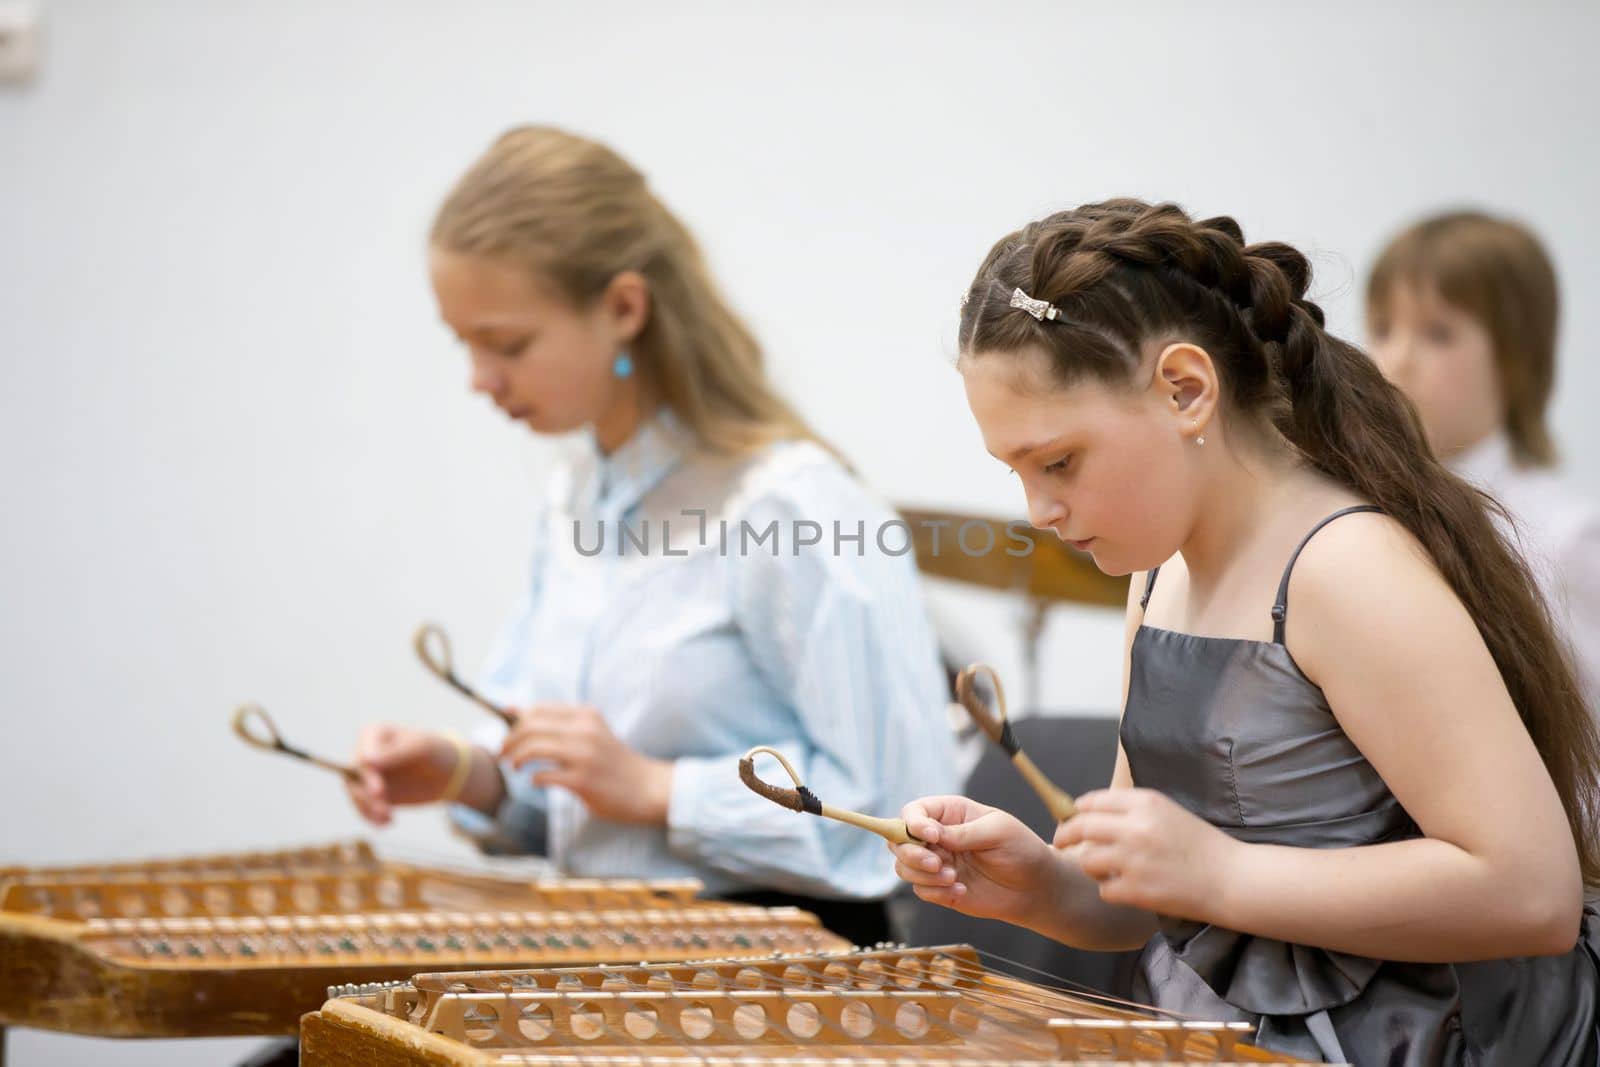 May 21, 2021 Belarus. city of Gomil. Holiday at the music school.The girl plays the ethnic instrument dulcimer